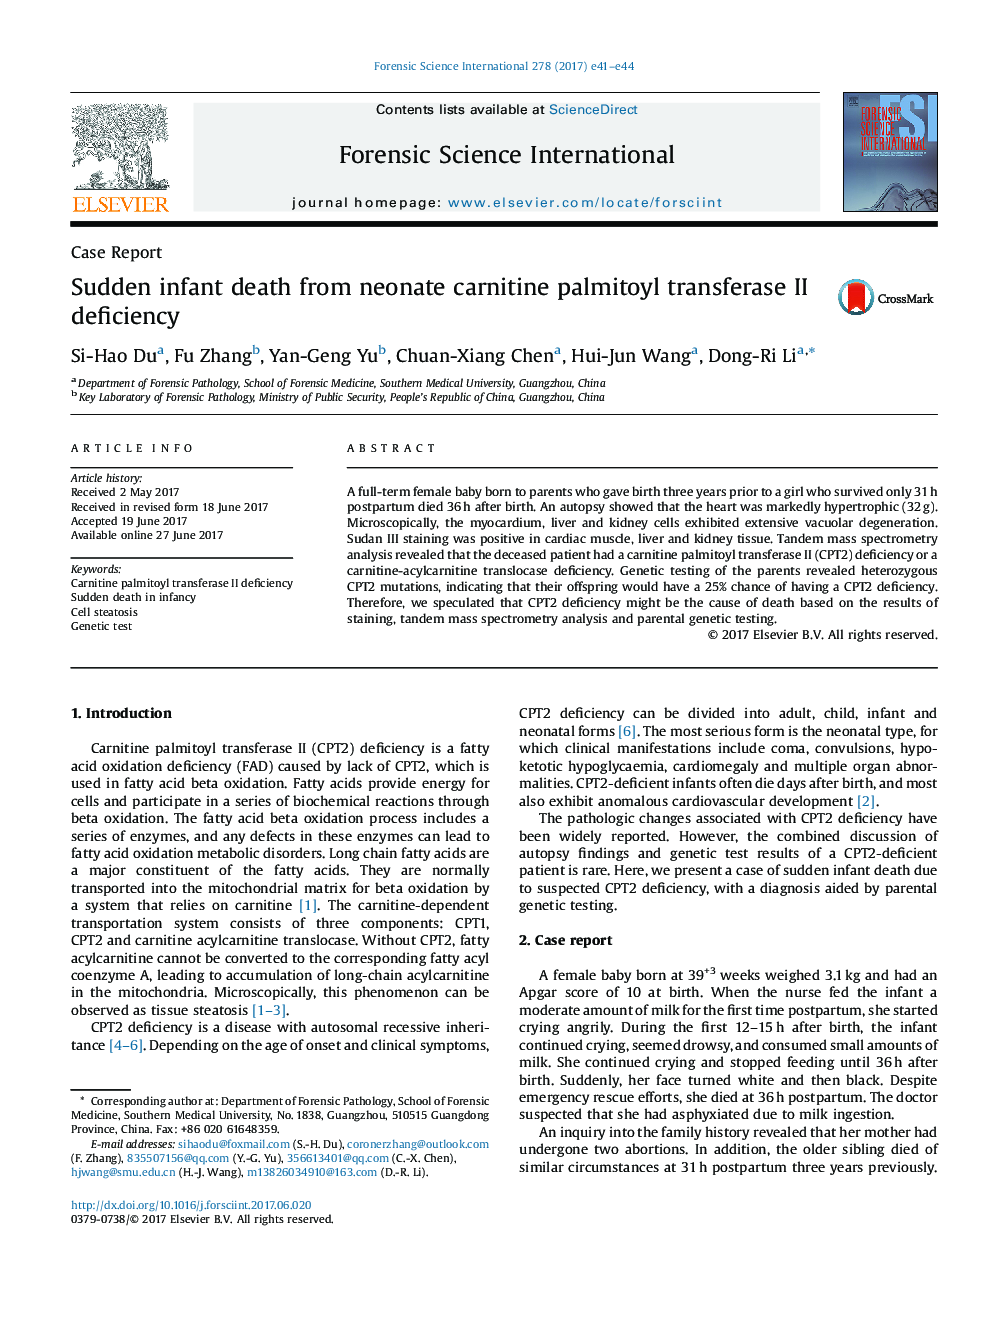 Sudden infant death from neonate carnitine palmitoyl transferase II deficiency